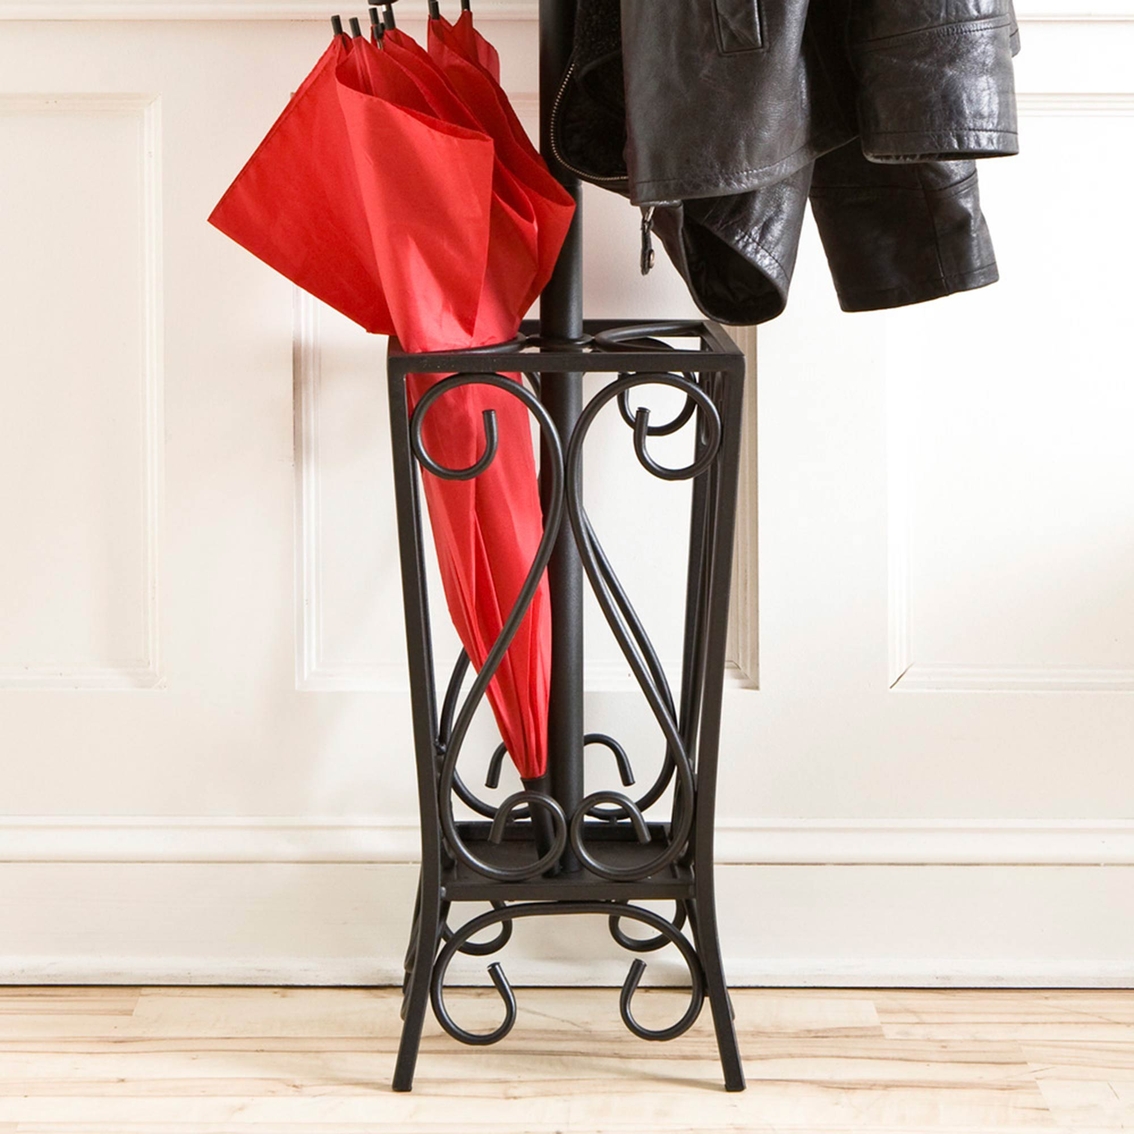 SEI Scrolled Coat Rack and Umbrella Stand - Image 3 of 4